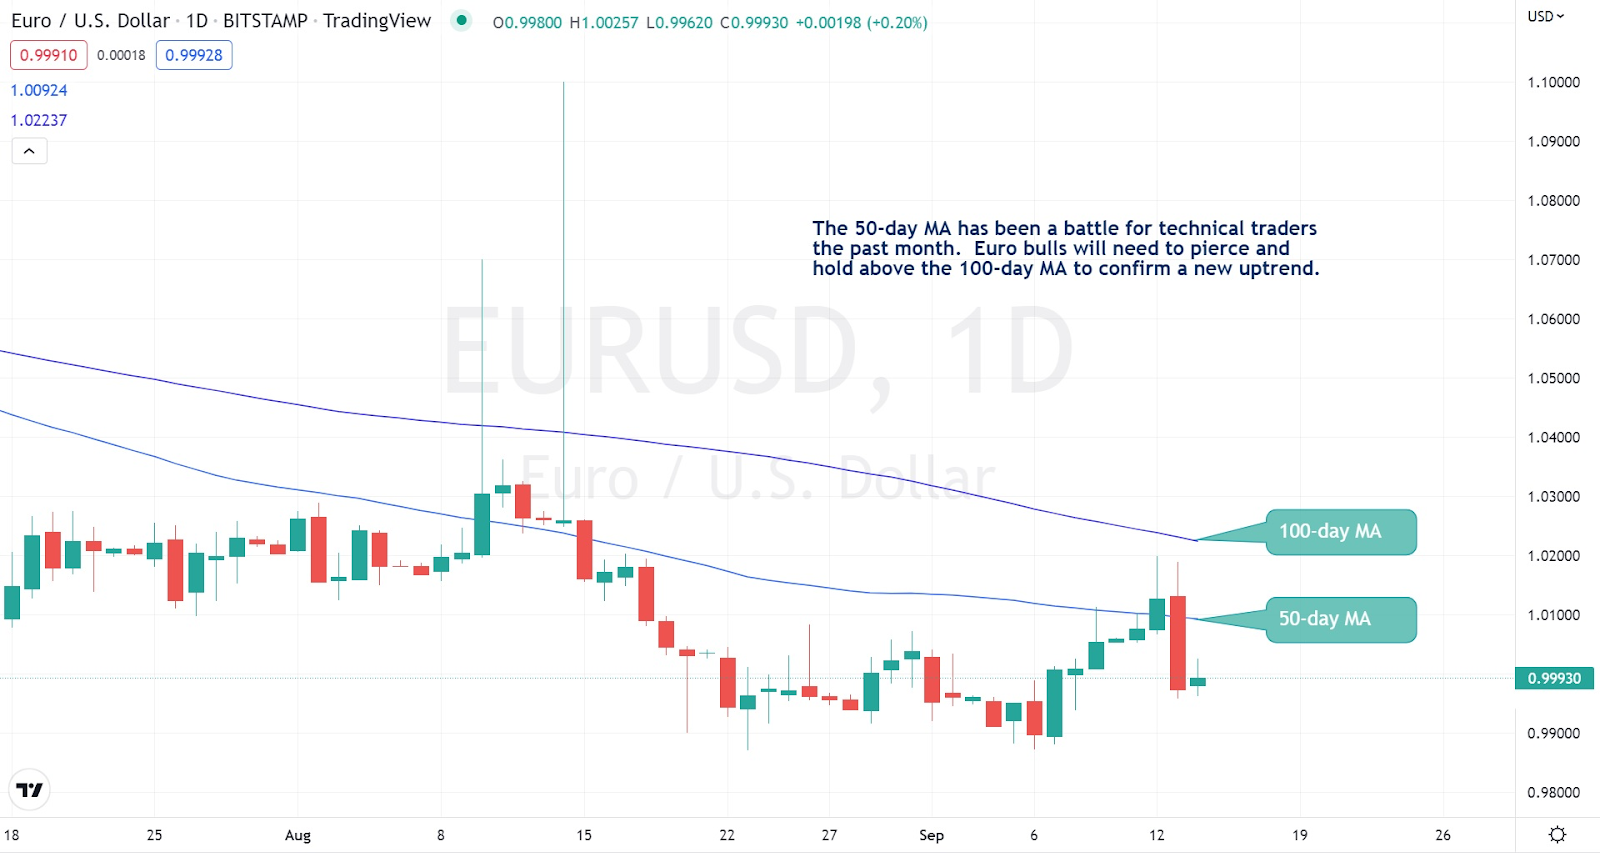 EUR/USD daily price chart. Source: TradingView